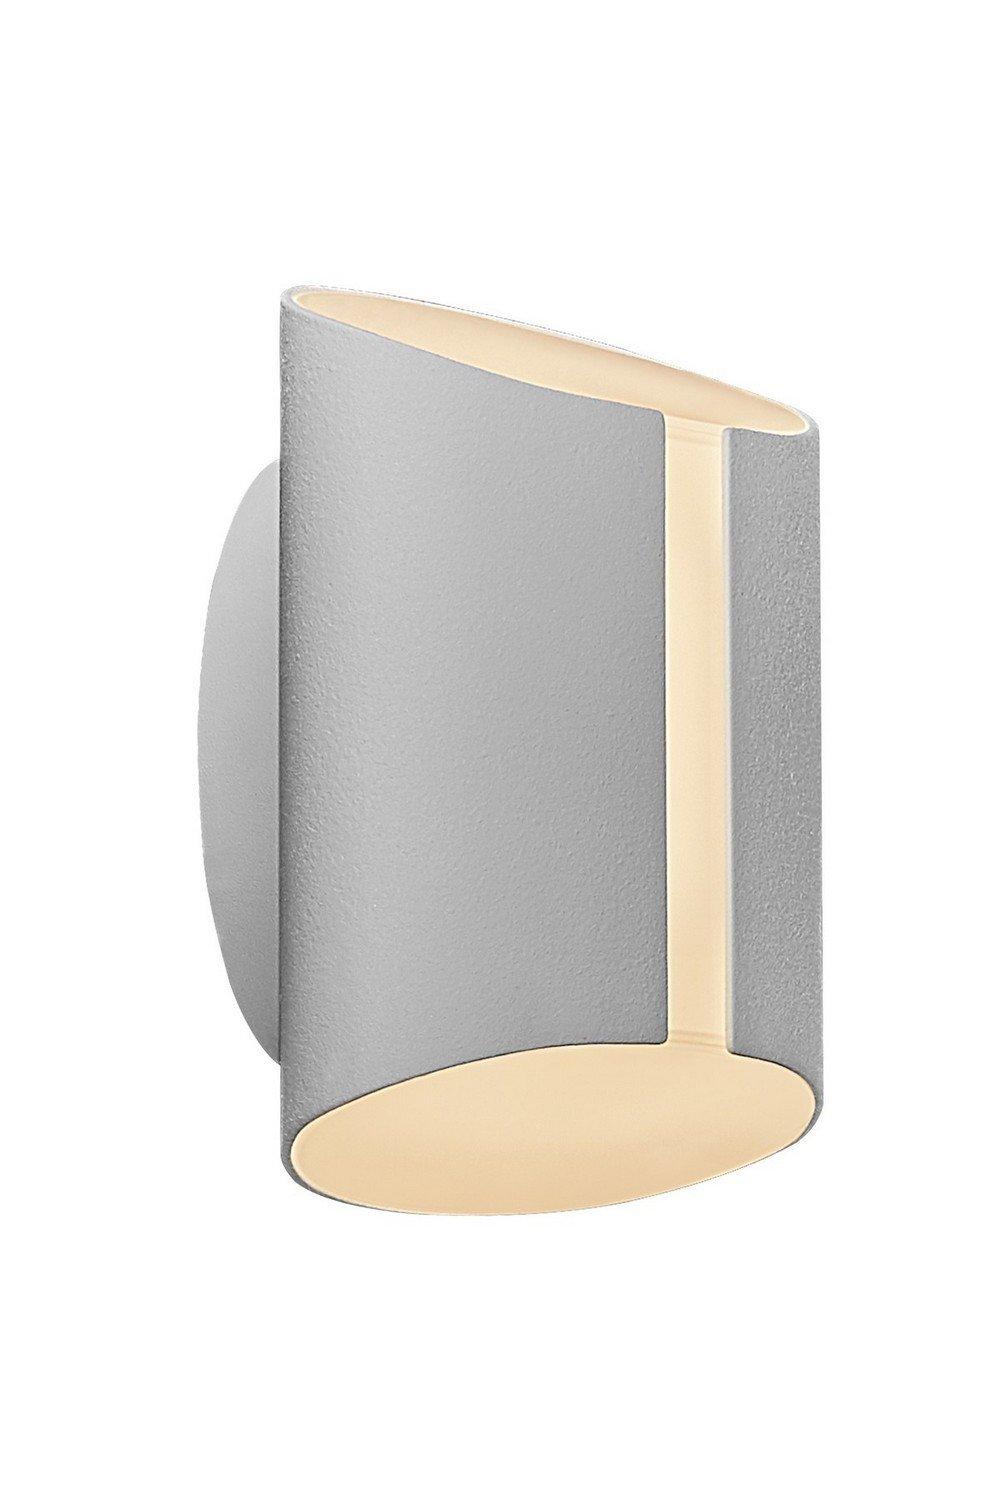 Grip Smart LED Outdoor Up Down Wall Lamp White IP54 22006500K